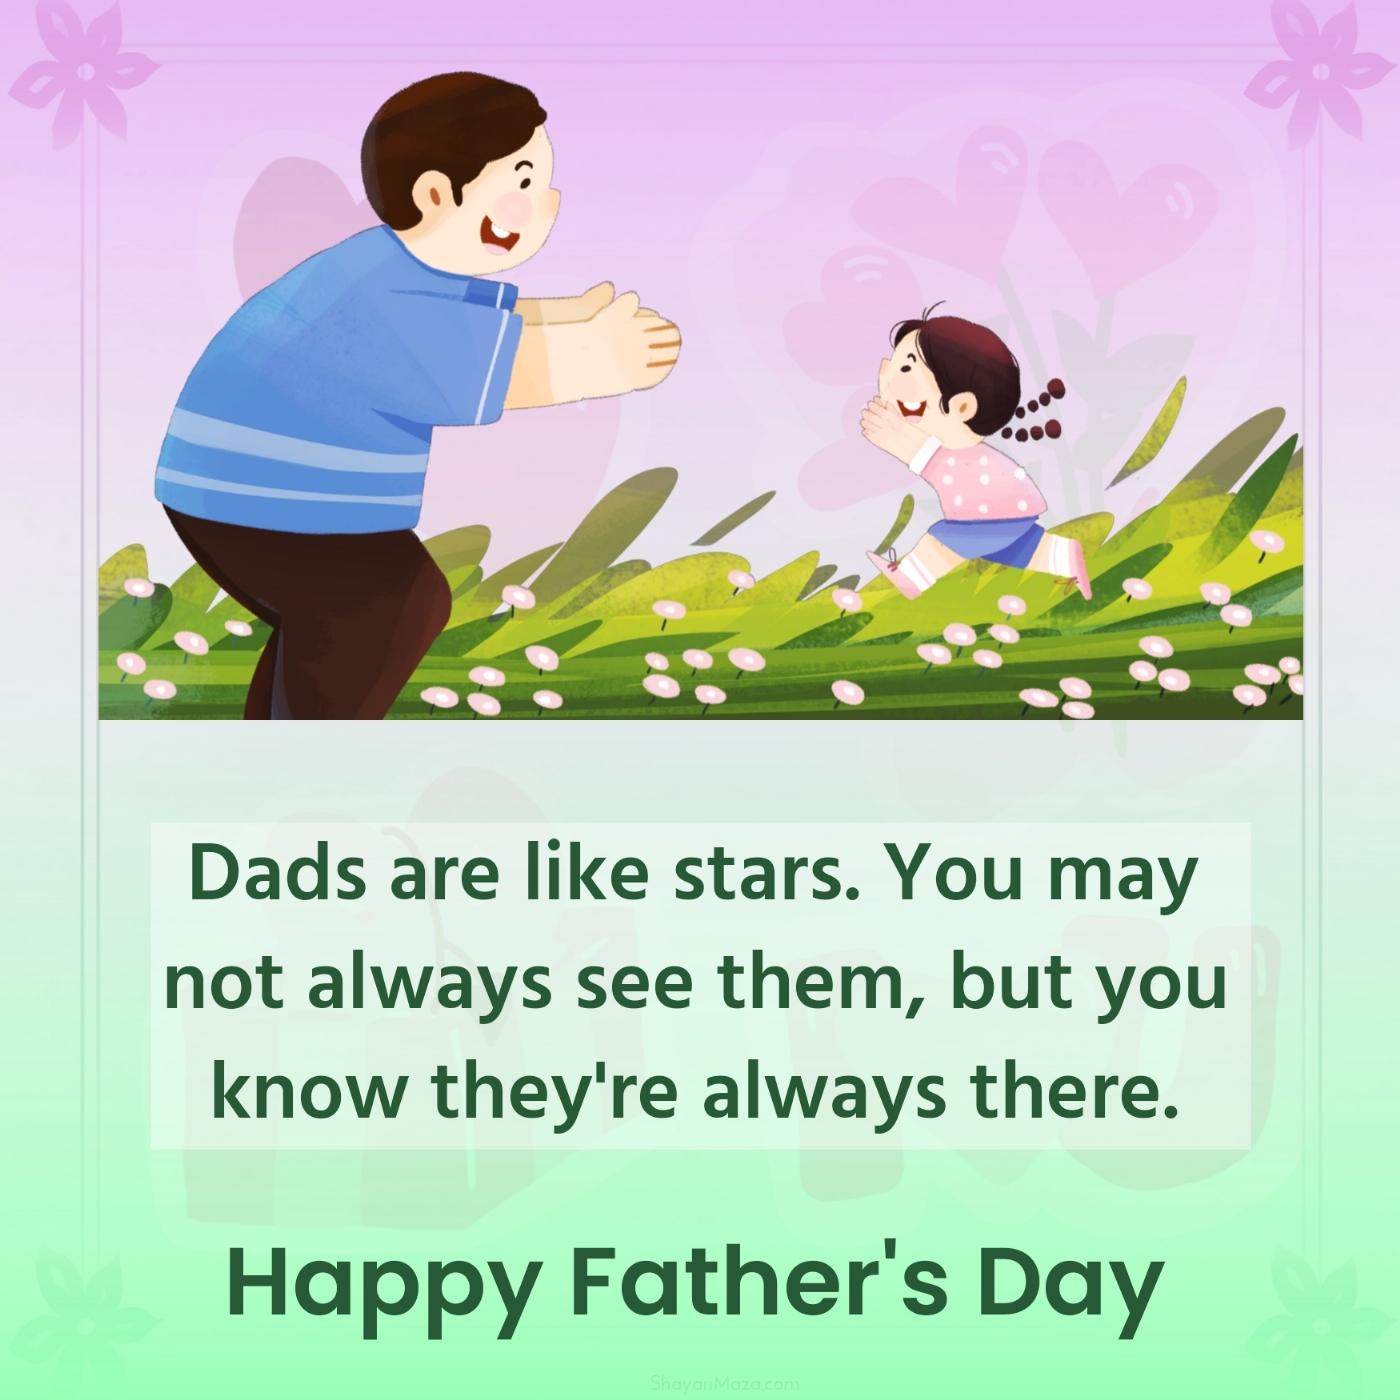 Dads are like stars You may not always see them